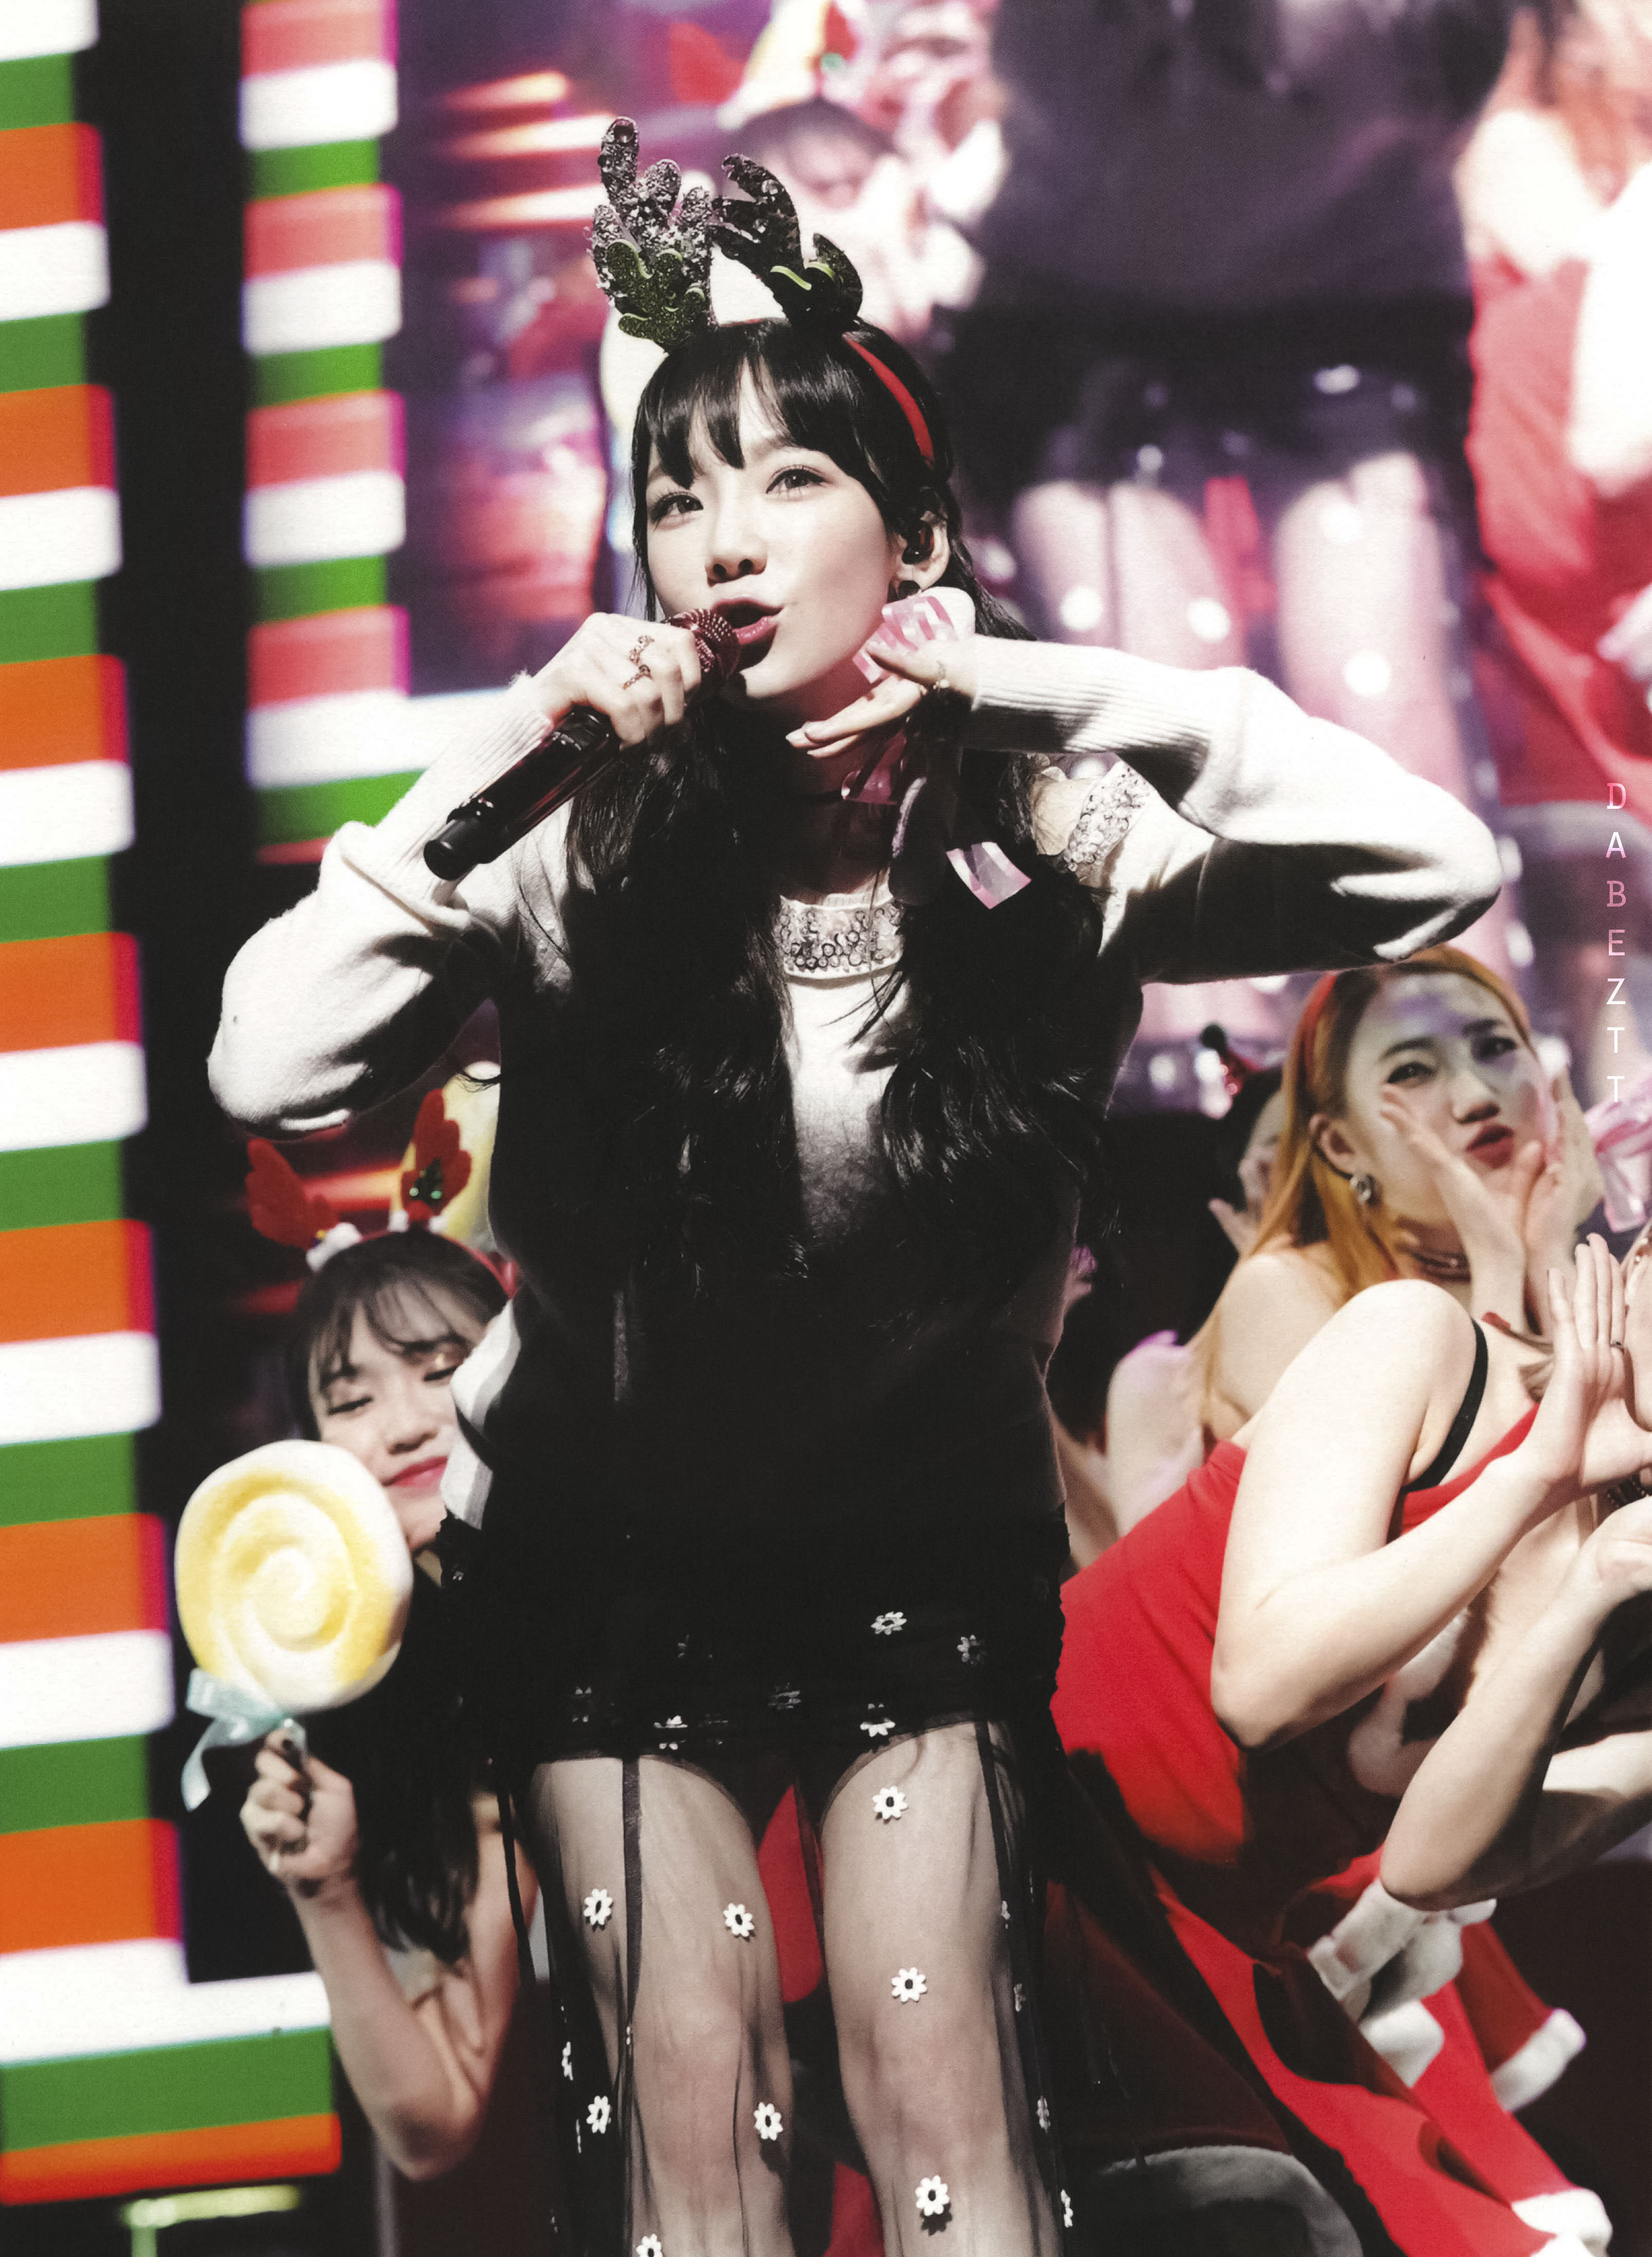 180323 TAEYEON SPECIAL LIVE “The Magic of Christmas Time” DVD 스캔 by Dabeztt (15).jpg